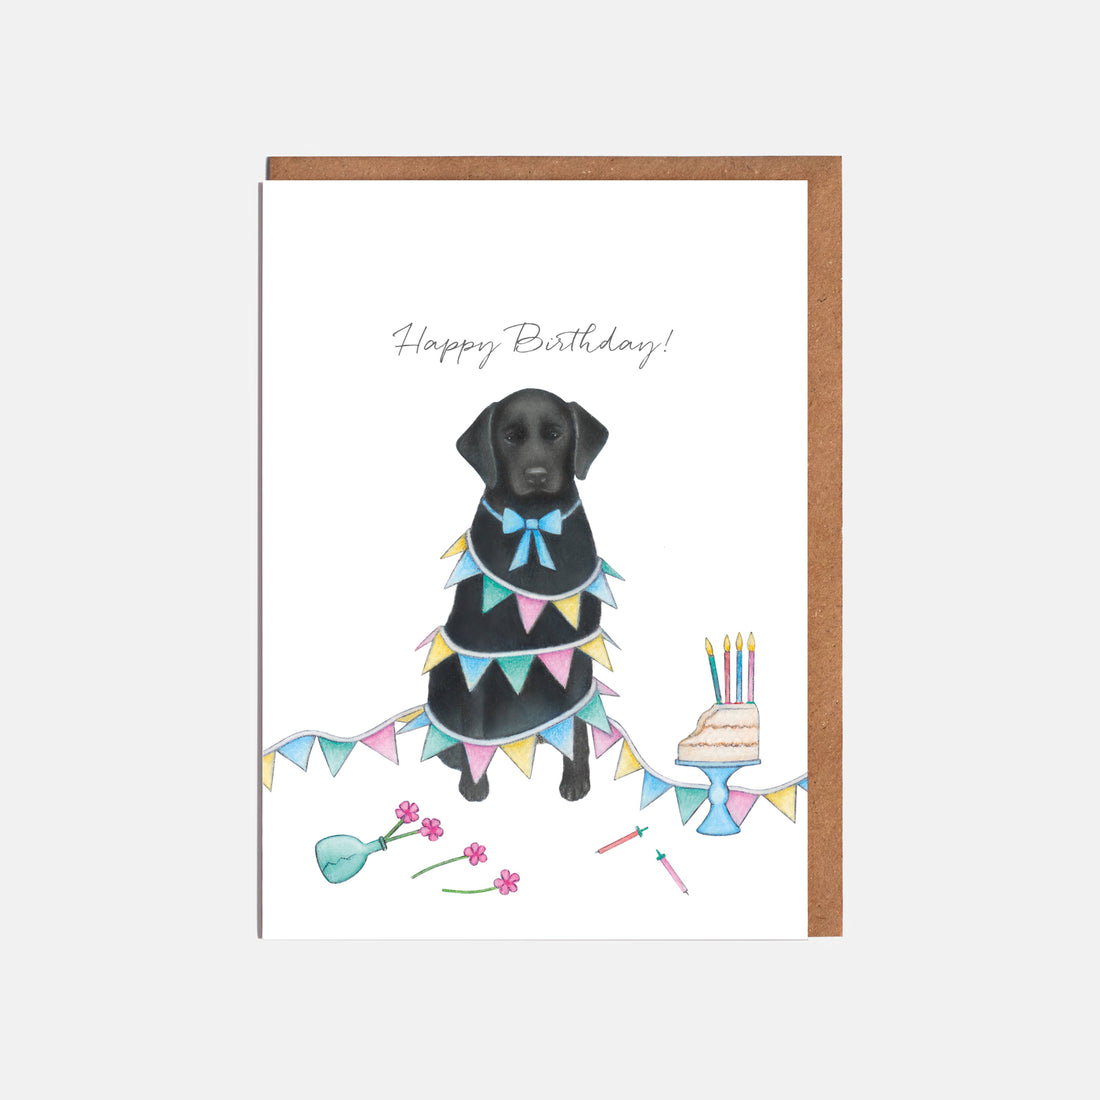 A Labrador and Bunting Birthday Card by Lottie Murphy.